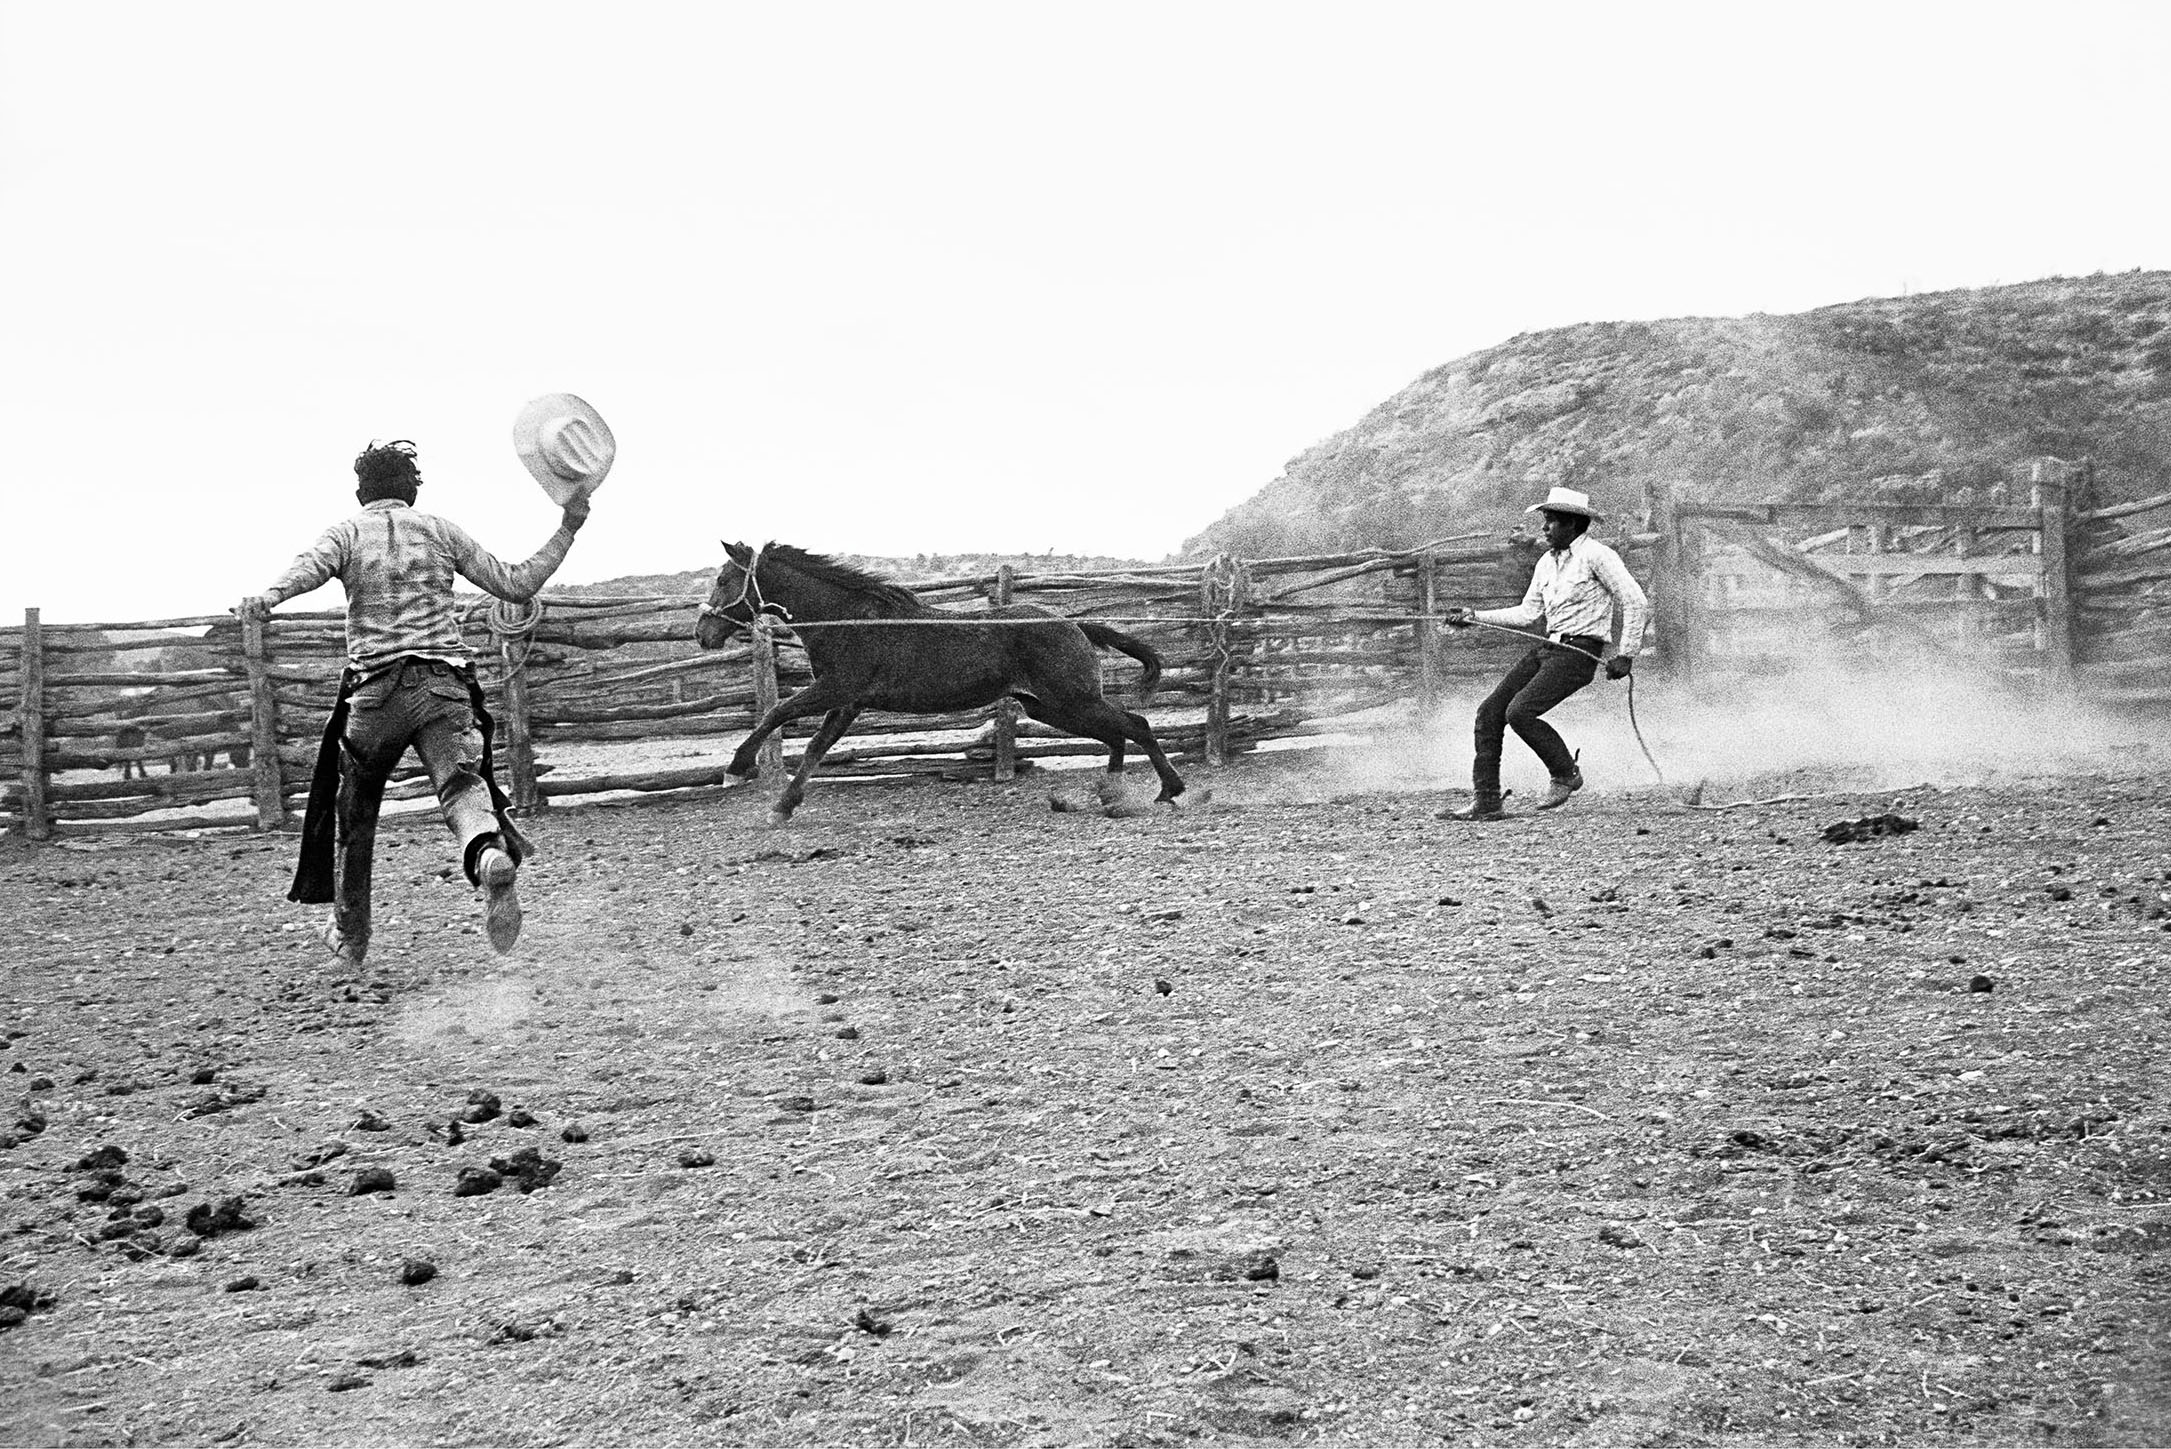 A black and white photograph of two men in the dust wrangling a horse